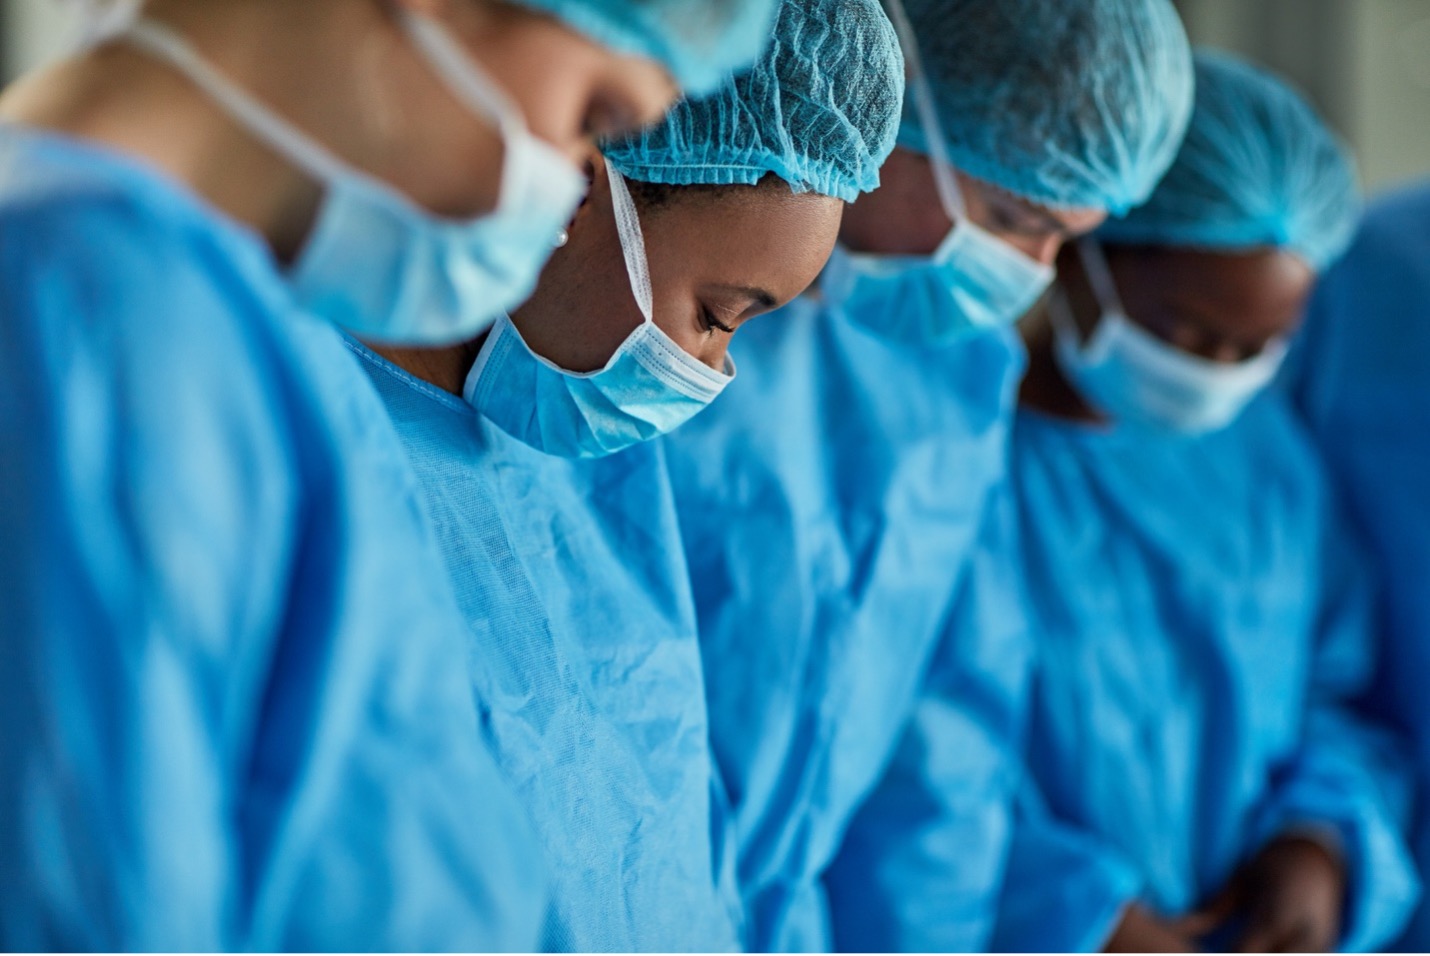 several dark-skinned medical professionals in blue scrubs, masks, and hairnets with heads bowed